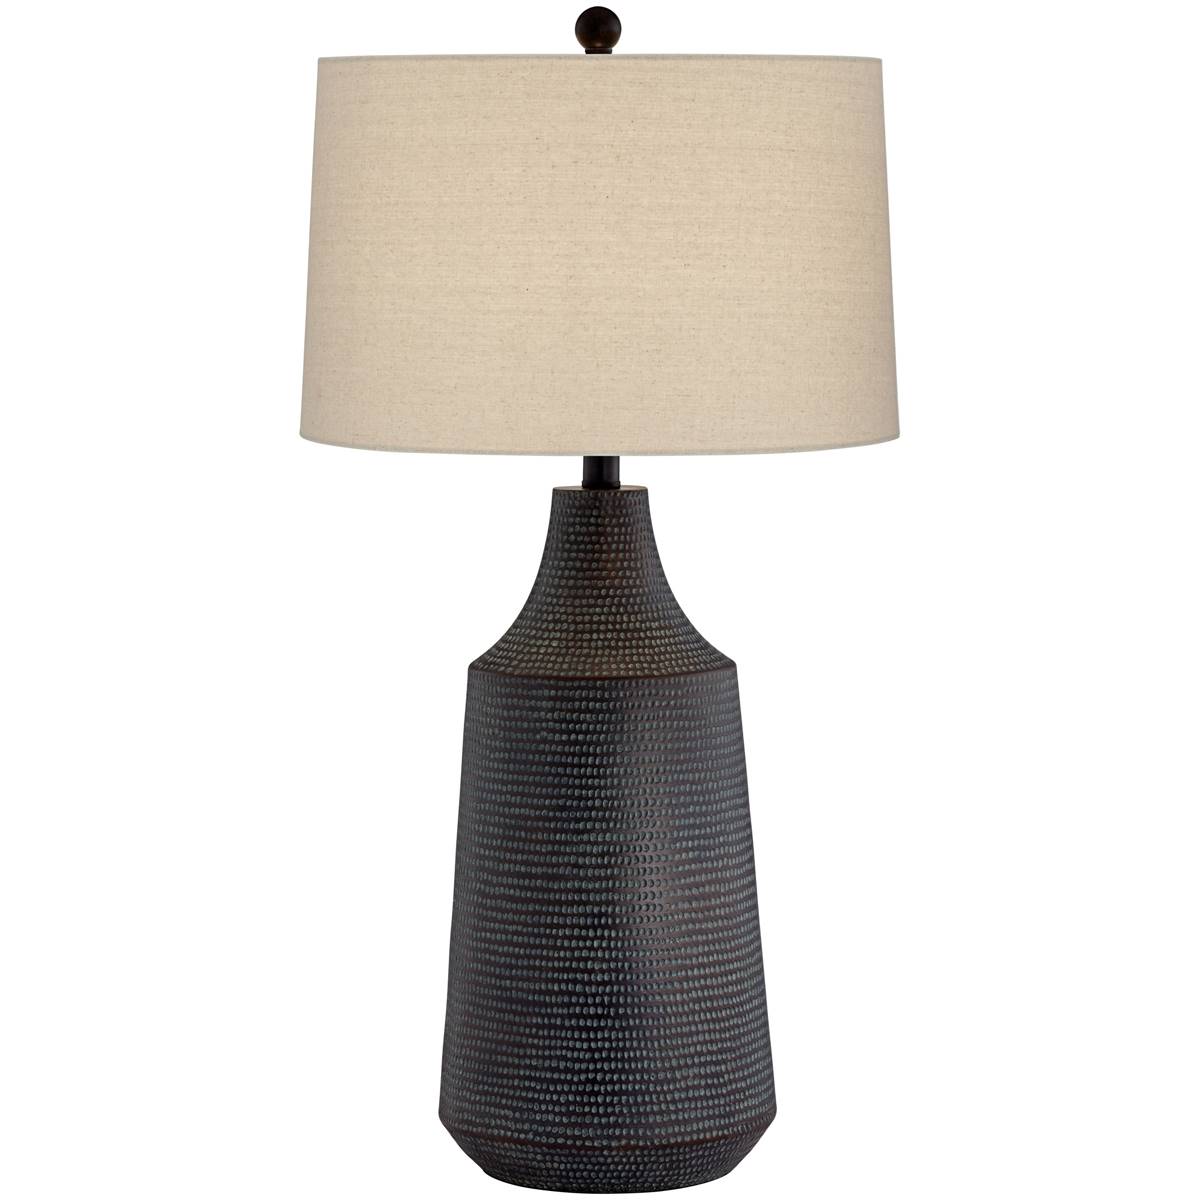 Pacific Coast Lighting Rocco 30in. Black  Table Lamp